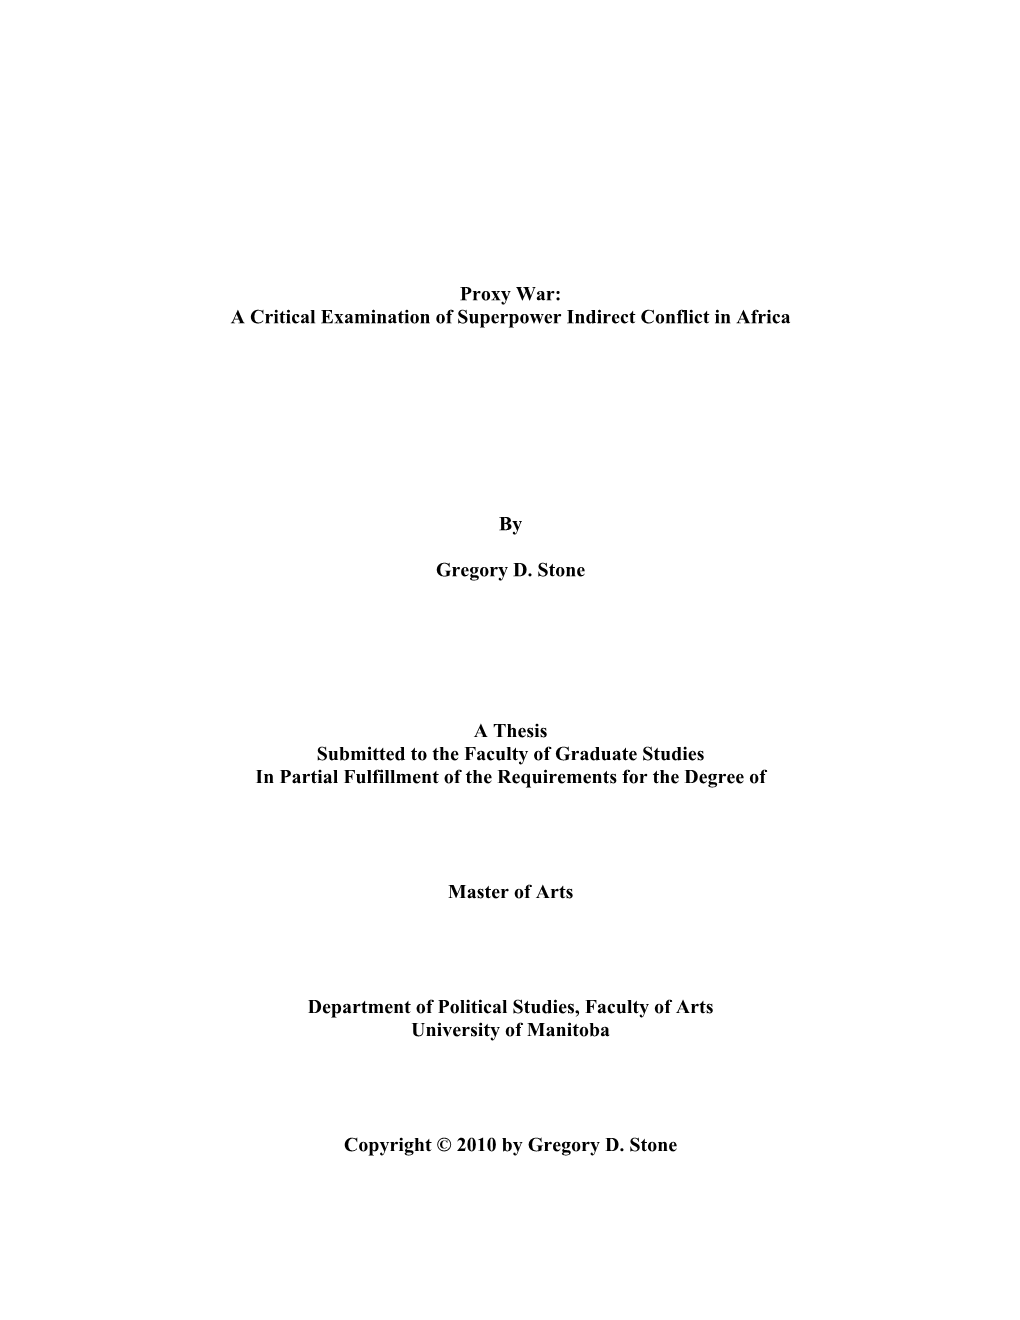 Proxy War: a Critical Examination of Superpower Indirect Conflict in Africa by Gregory D. Stone a Thesis Submitted to the Facult